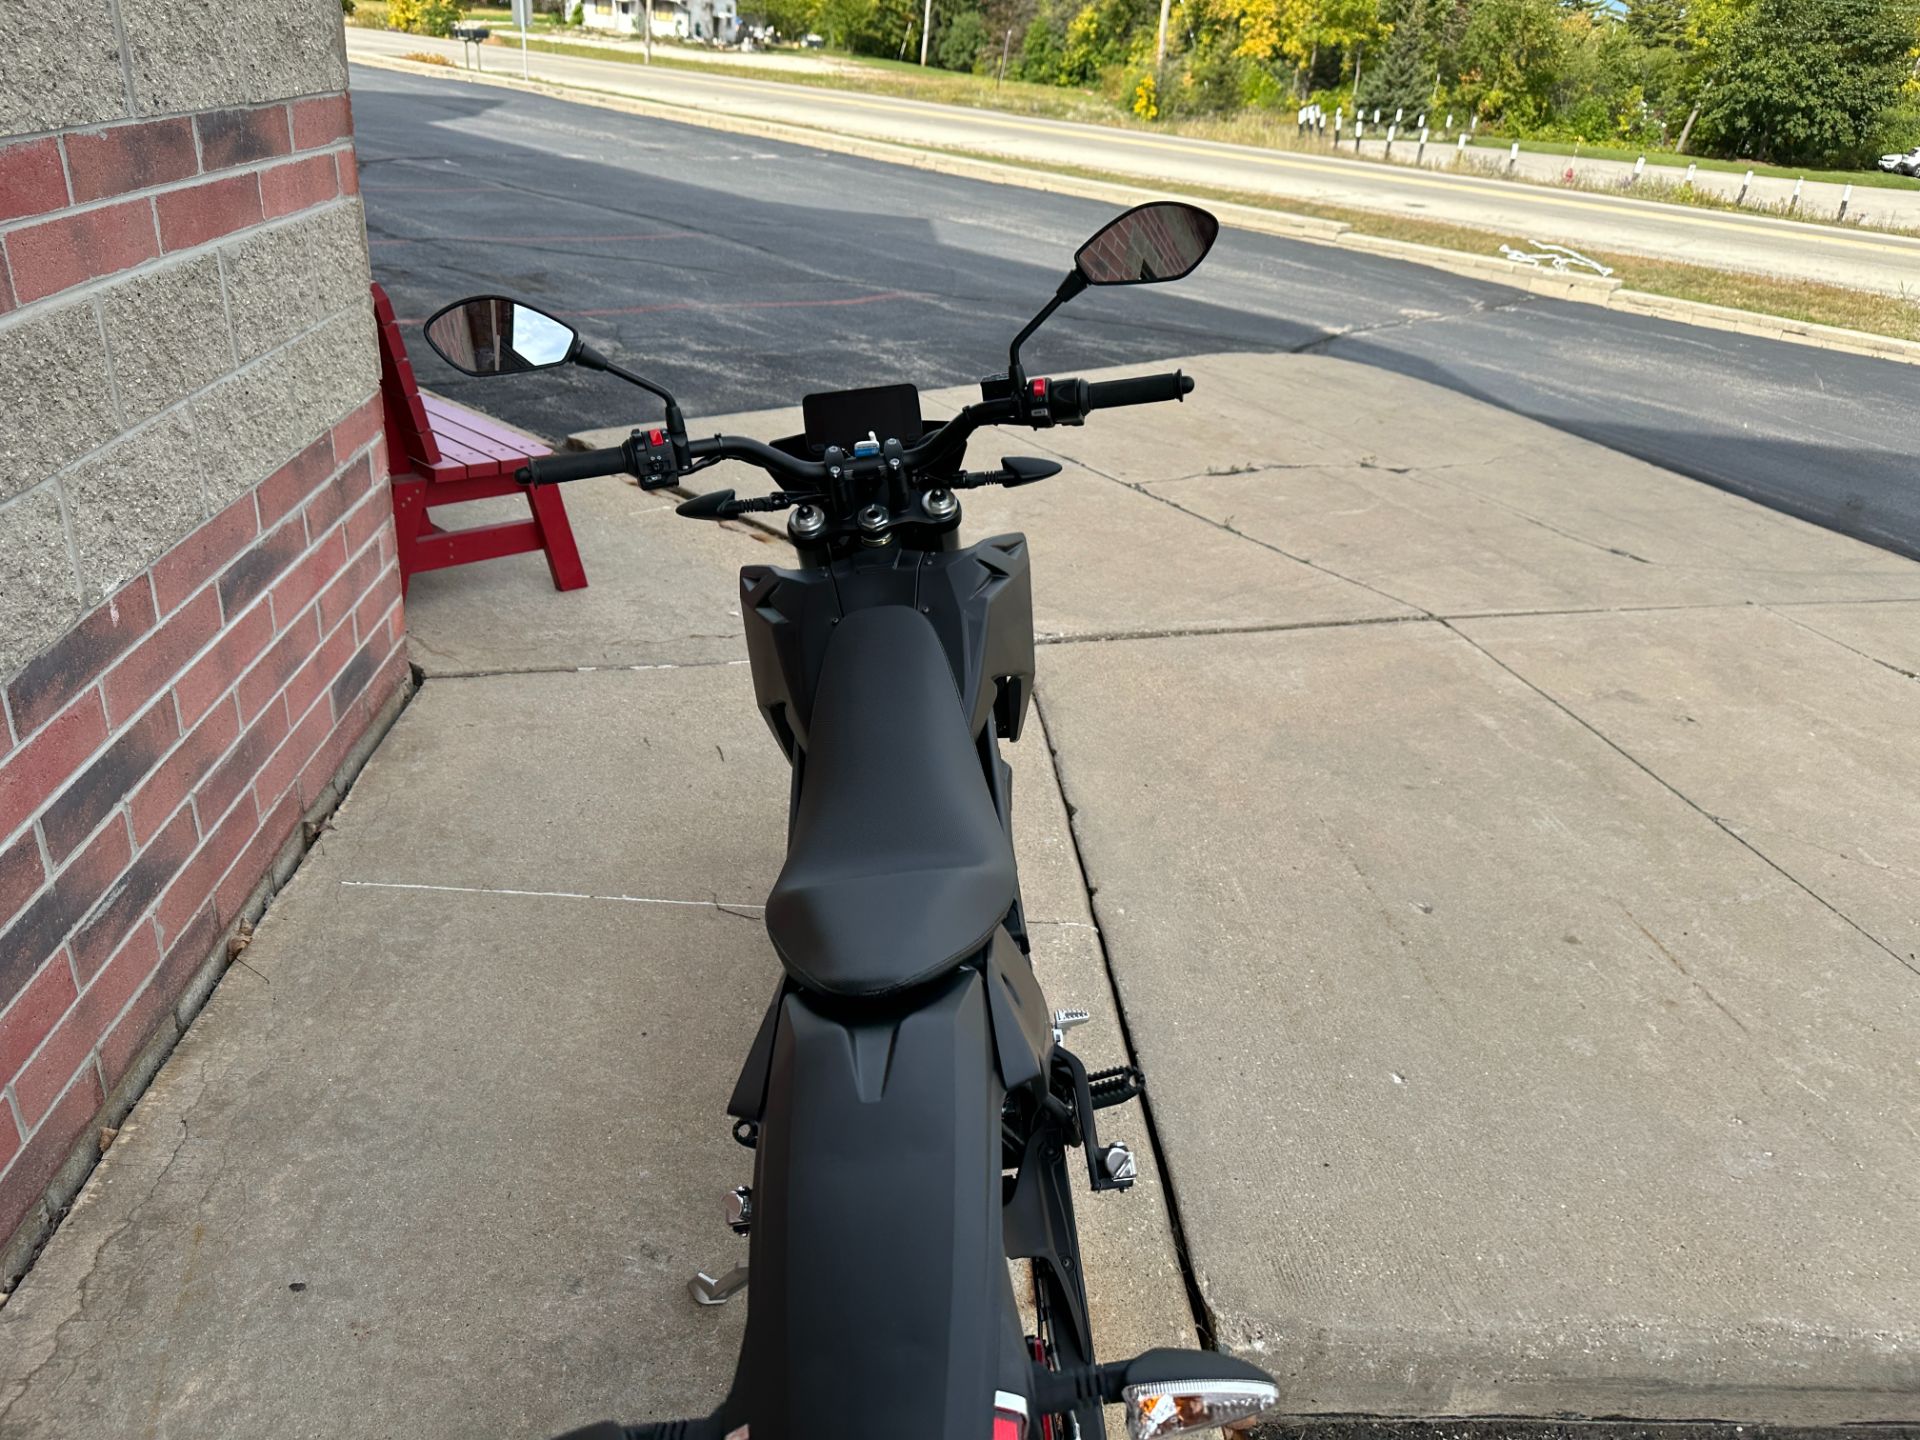 2023 Zero Motorcycles FX ZF7.2 Integrated in Muskego, Wisconsin - Photo 10